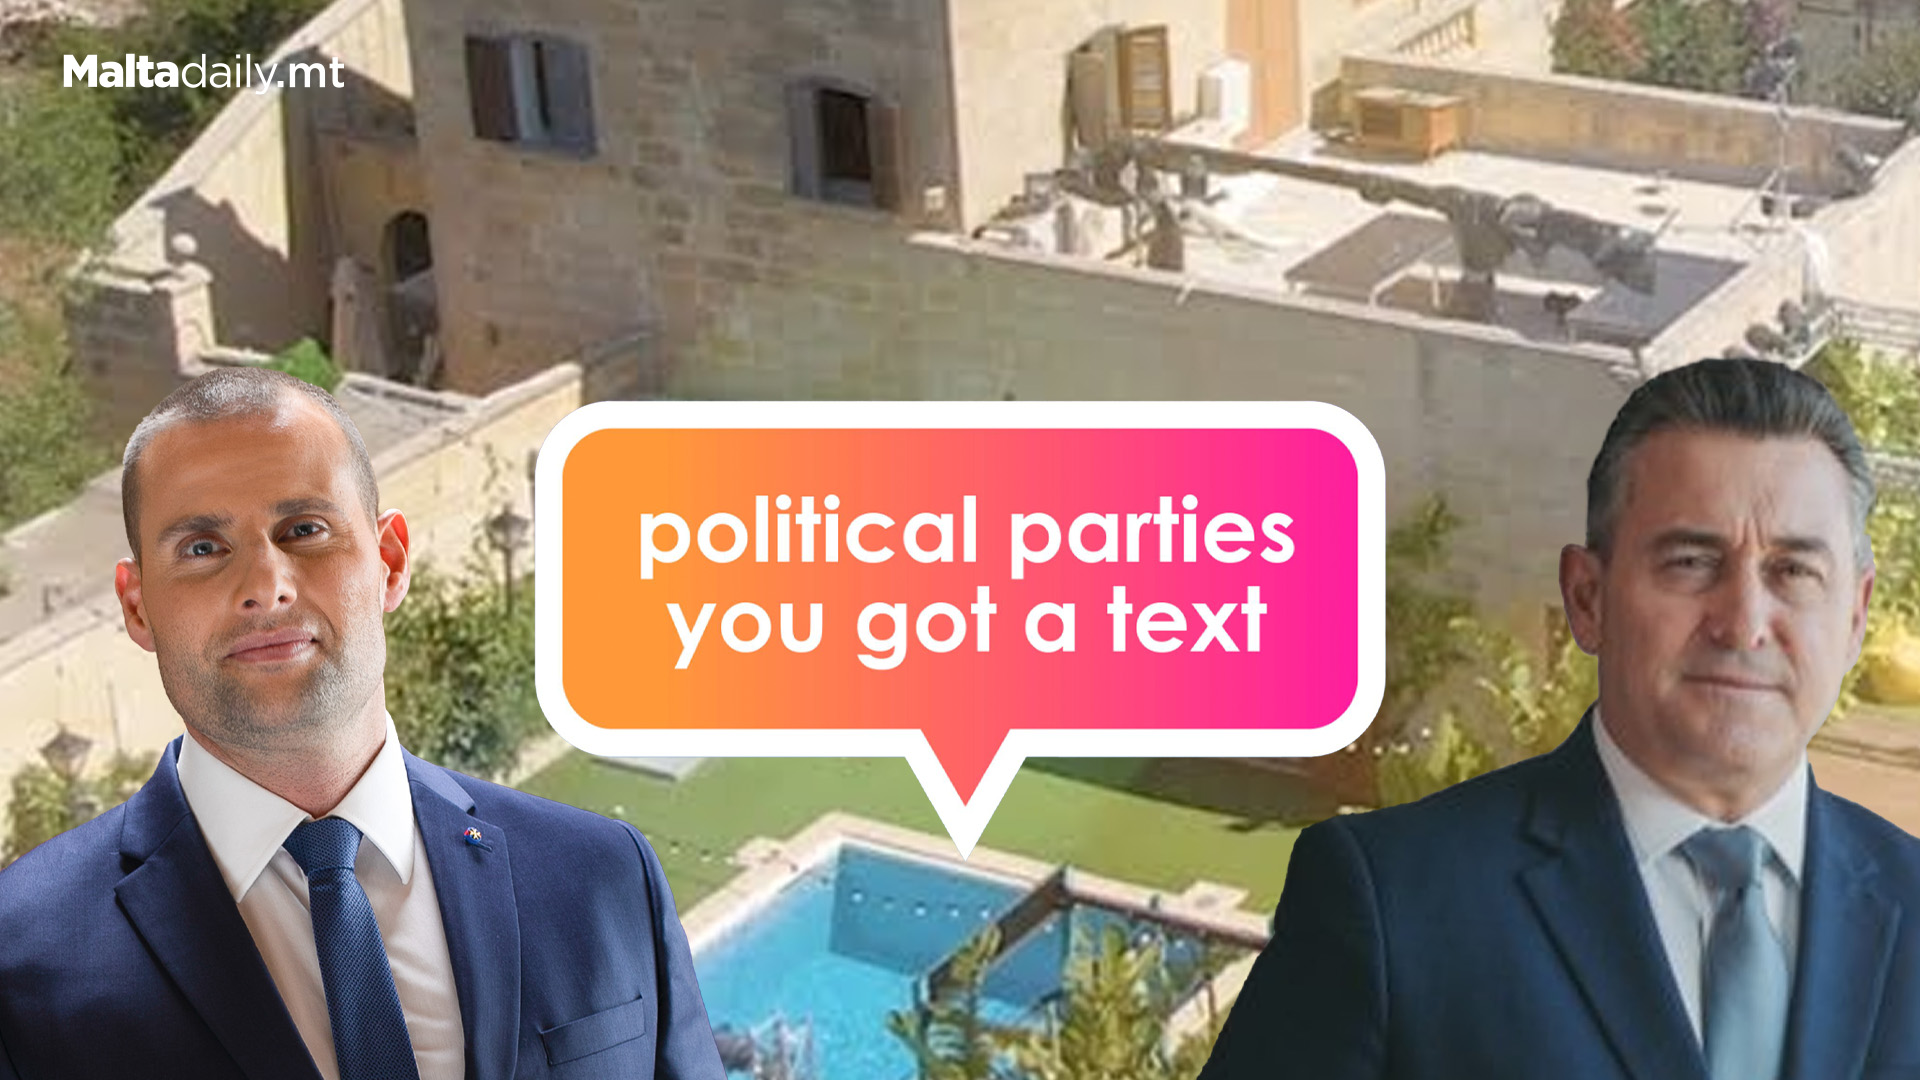 Love Island Malta Asks Political Ads To Re-Couple